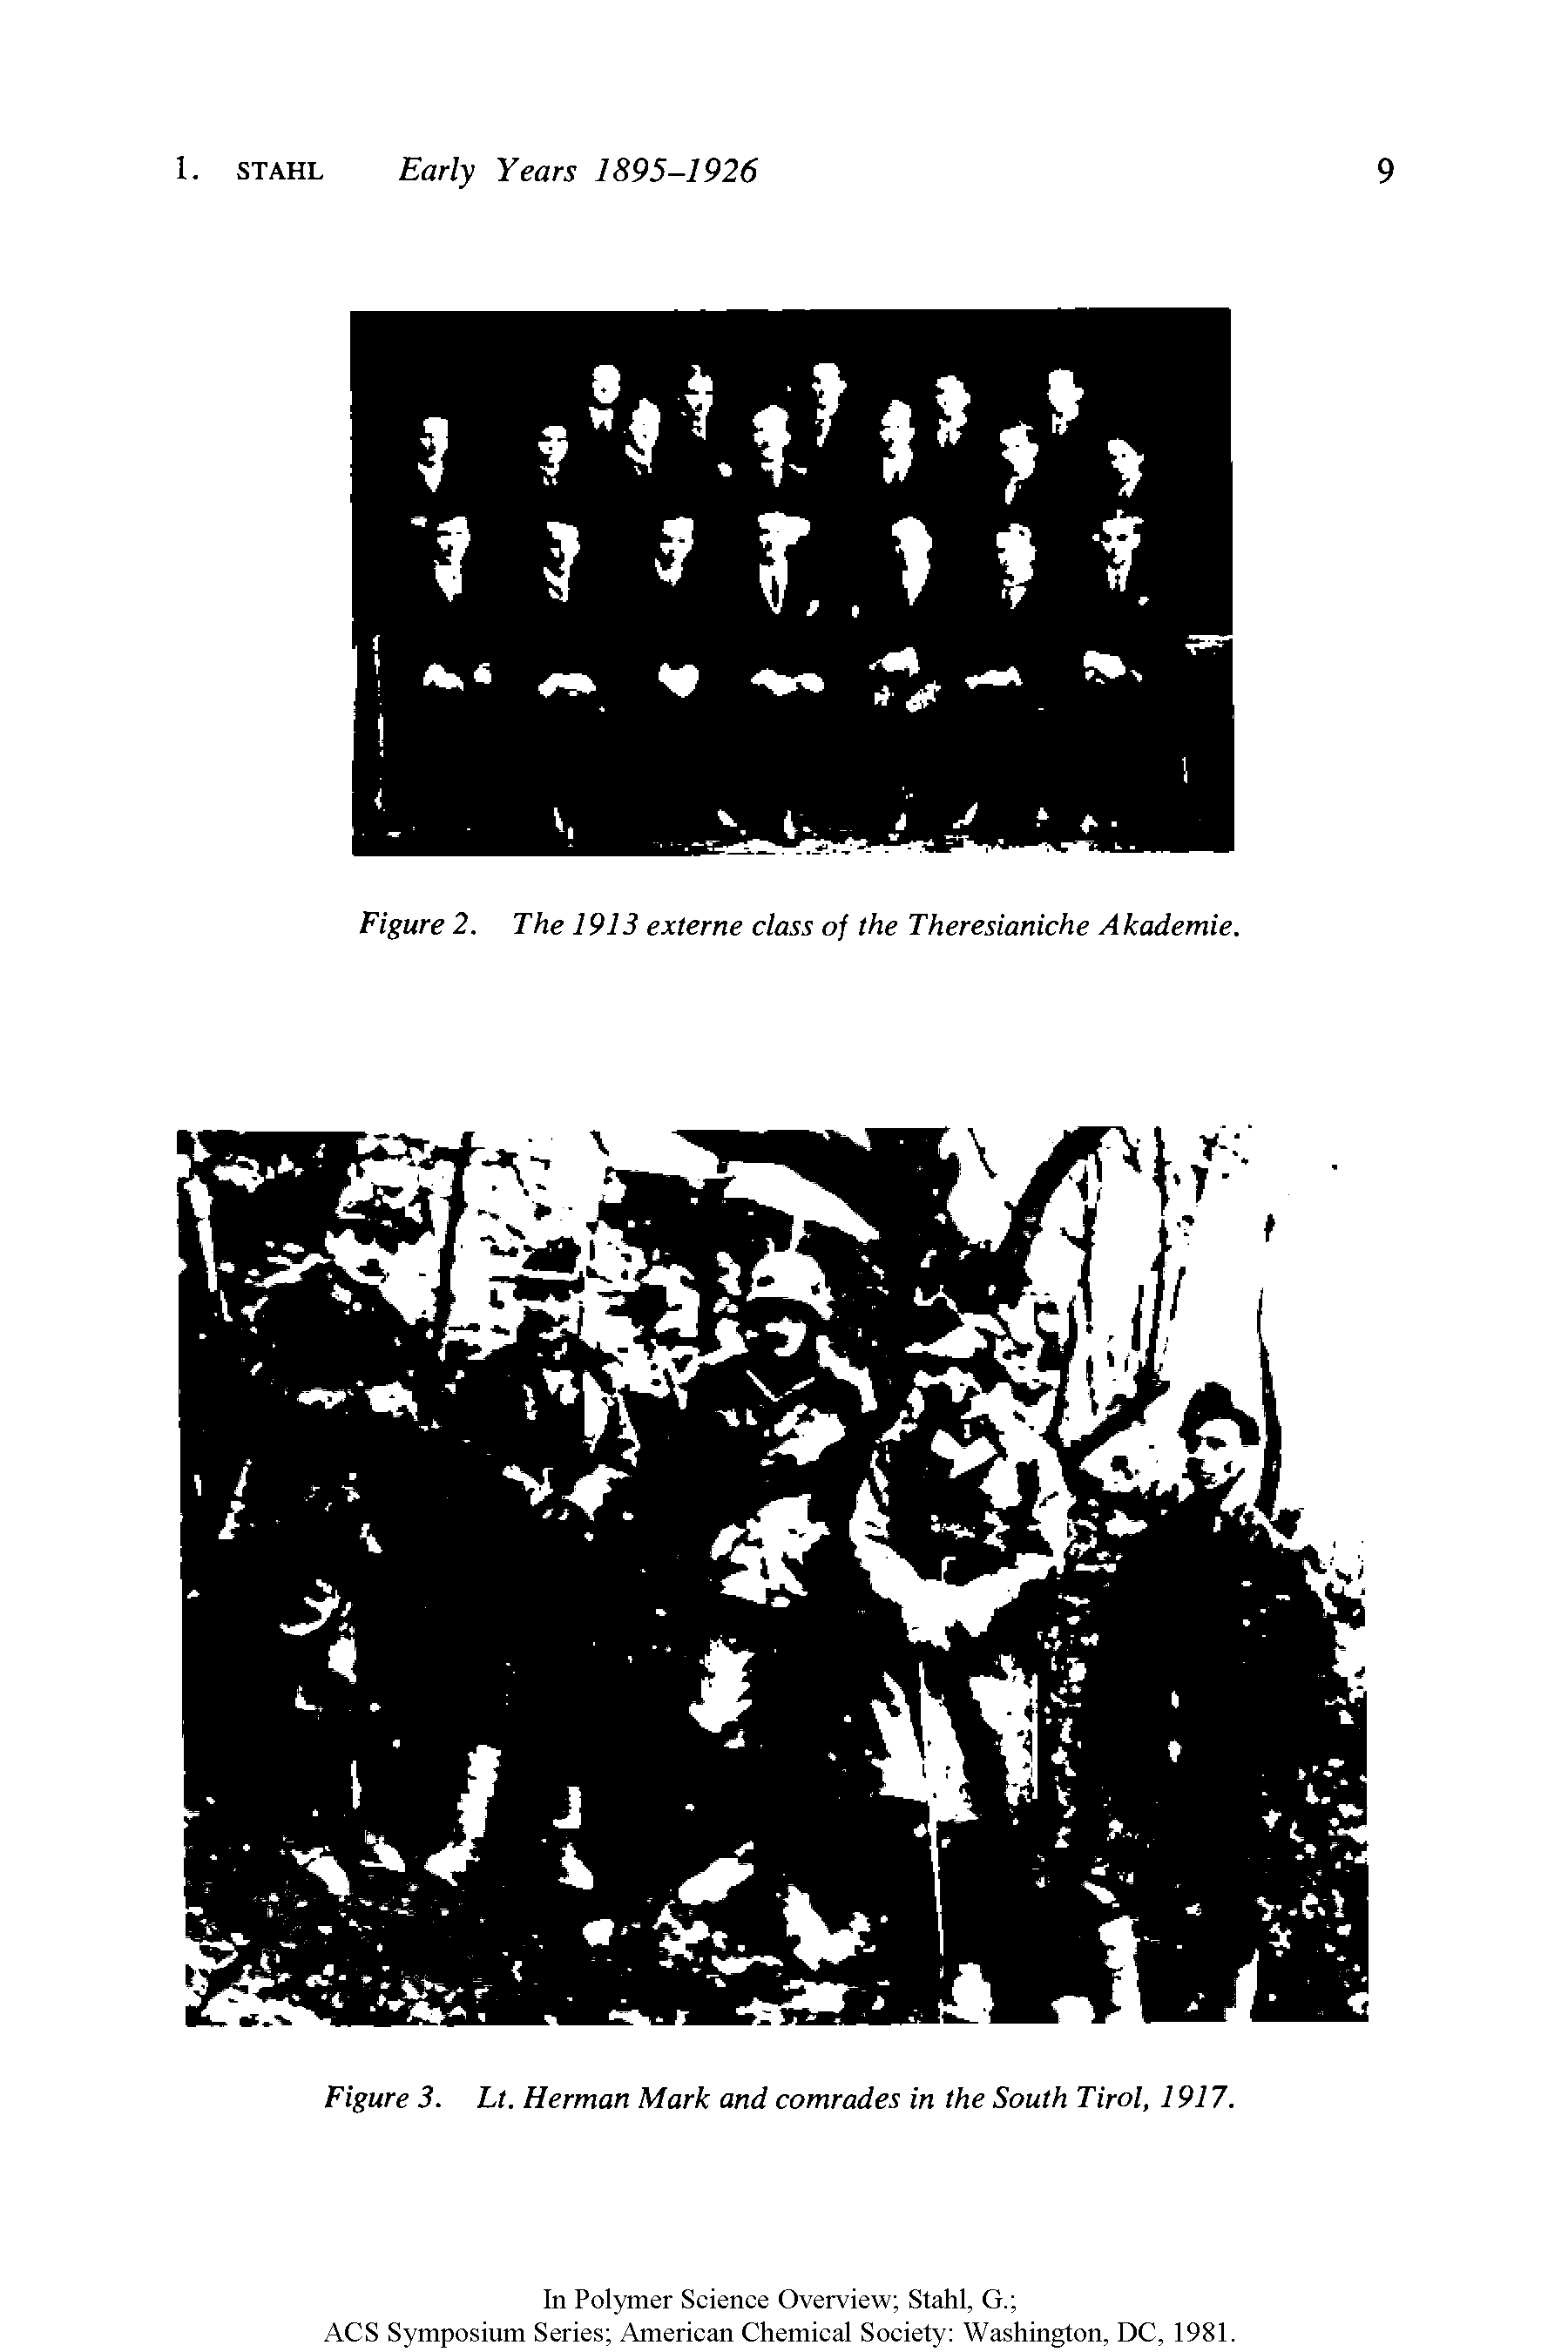 Figure 3. Lt. Herman Mark and comrades in the South Tirol, 1917.